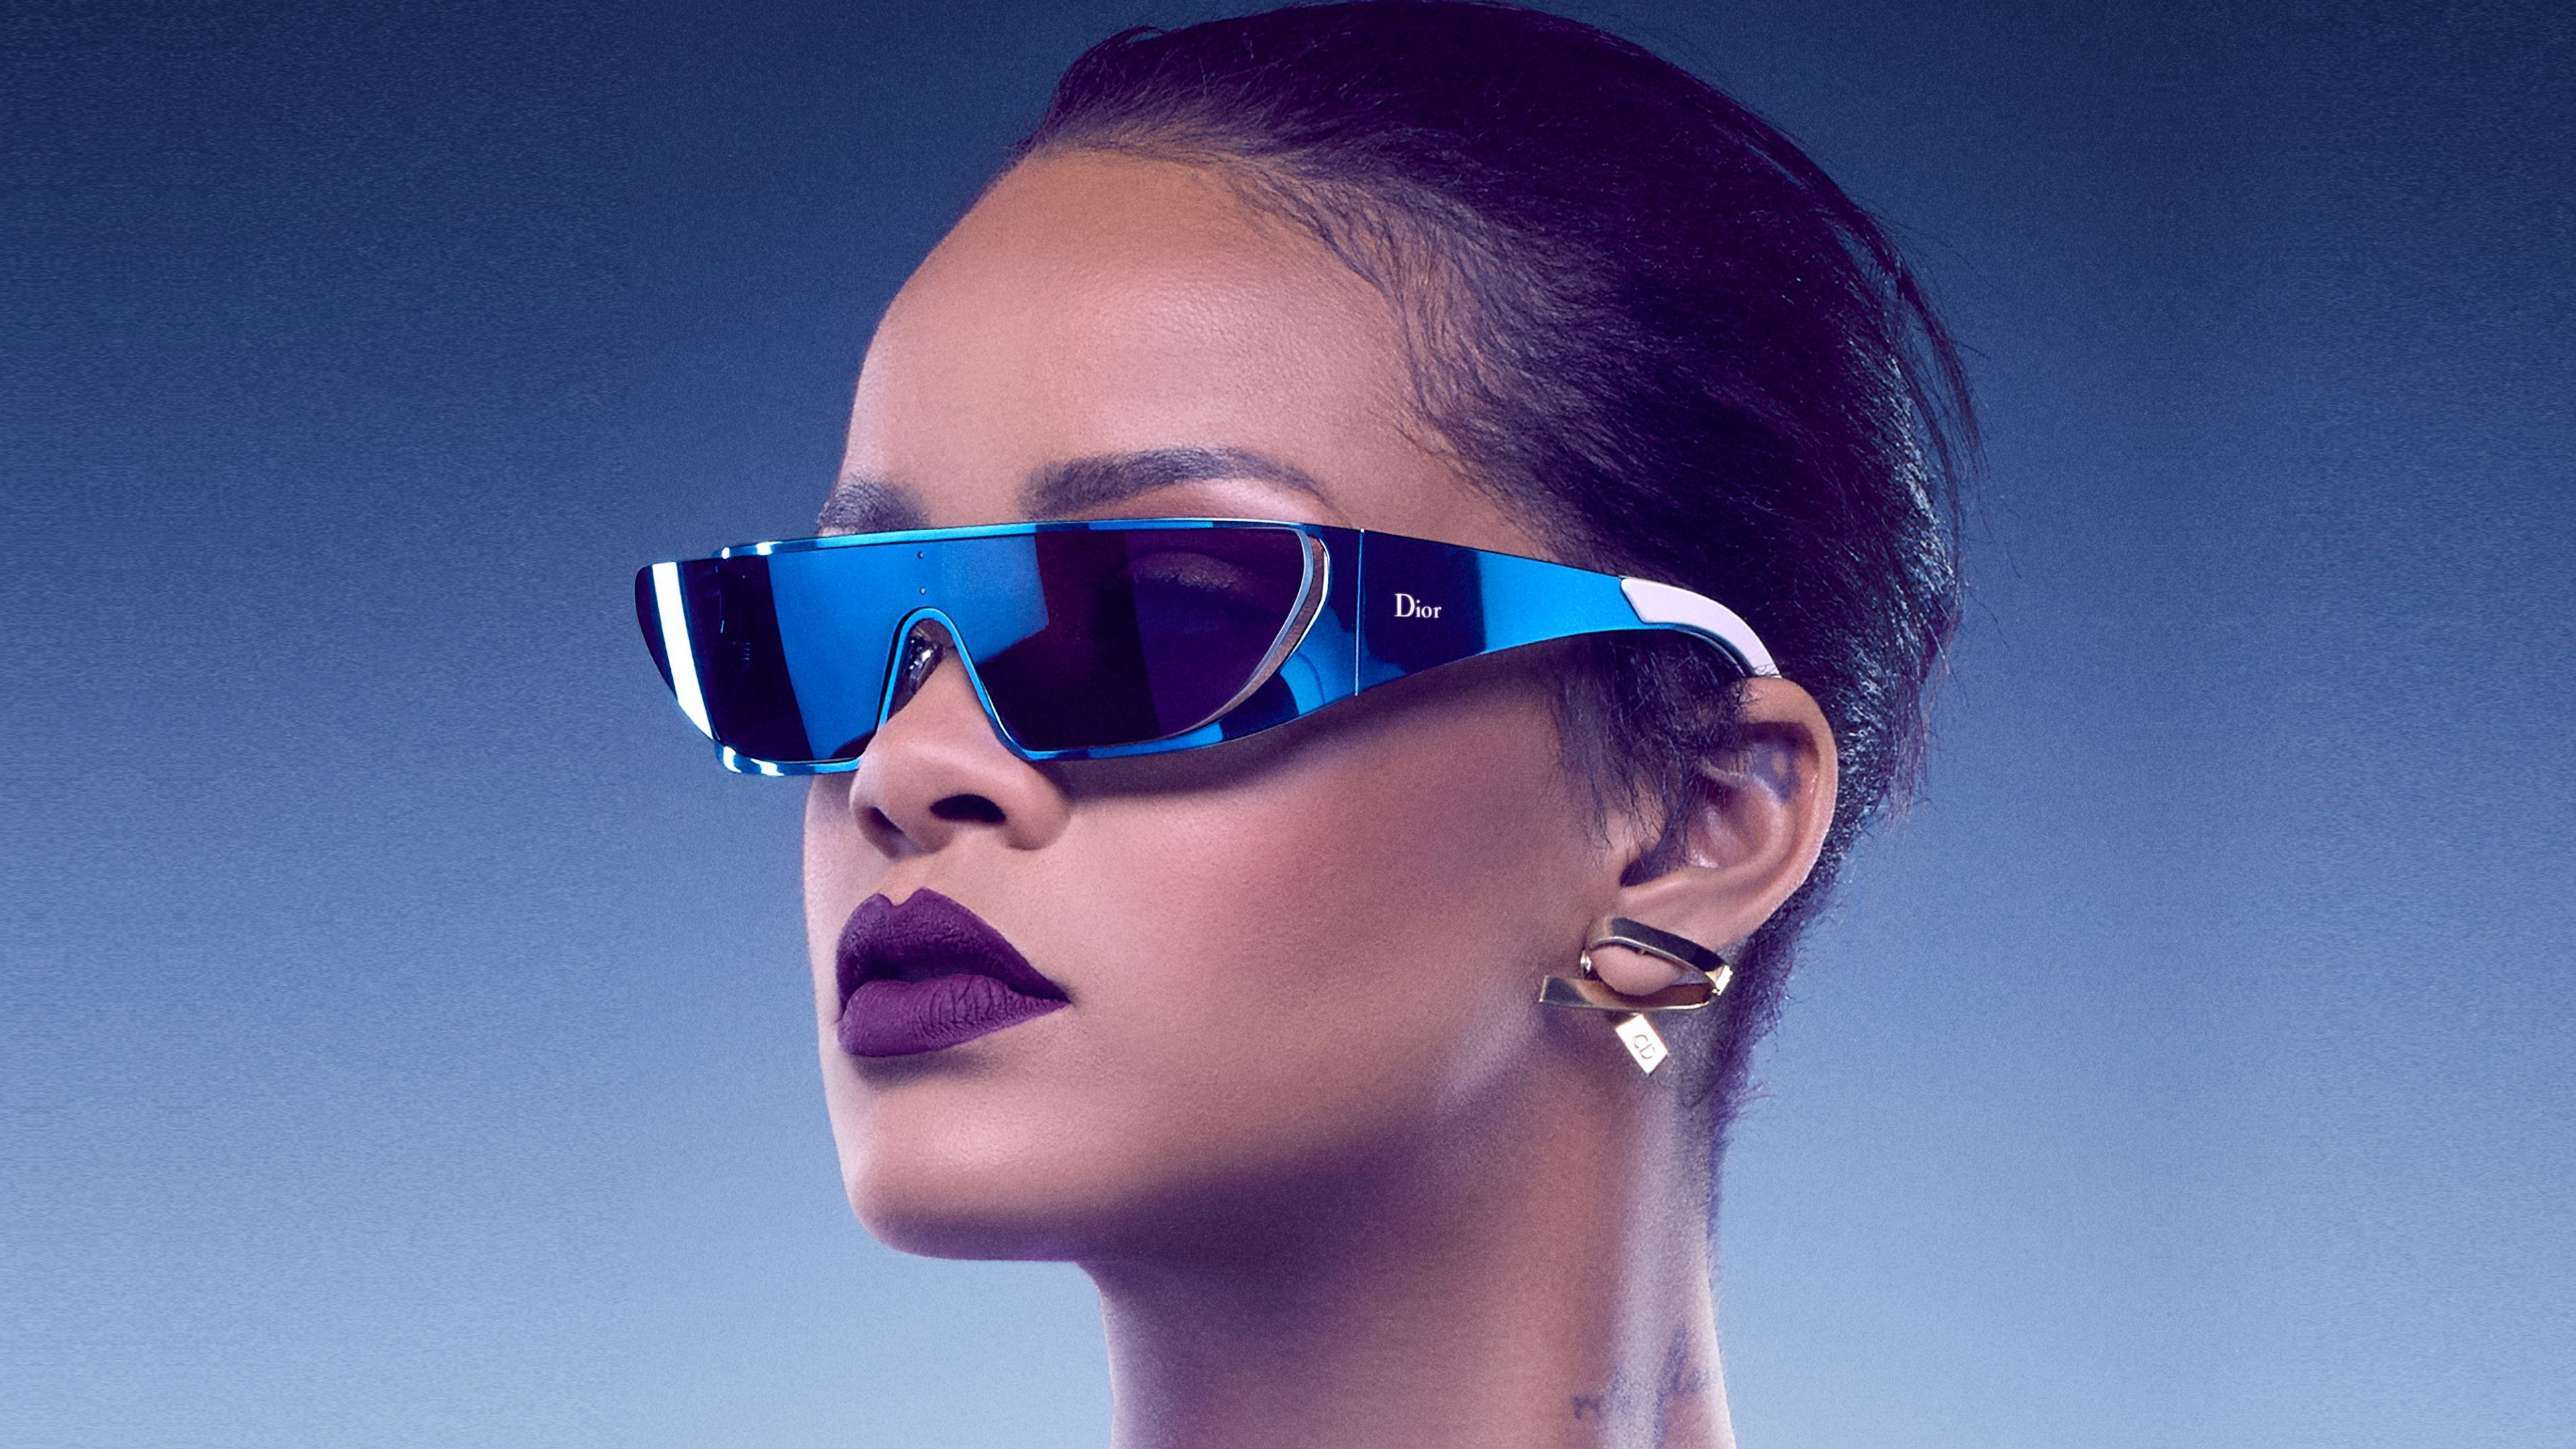 Rihanna 4K wallpaper for your desktop or mobile screen free and easy to download